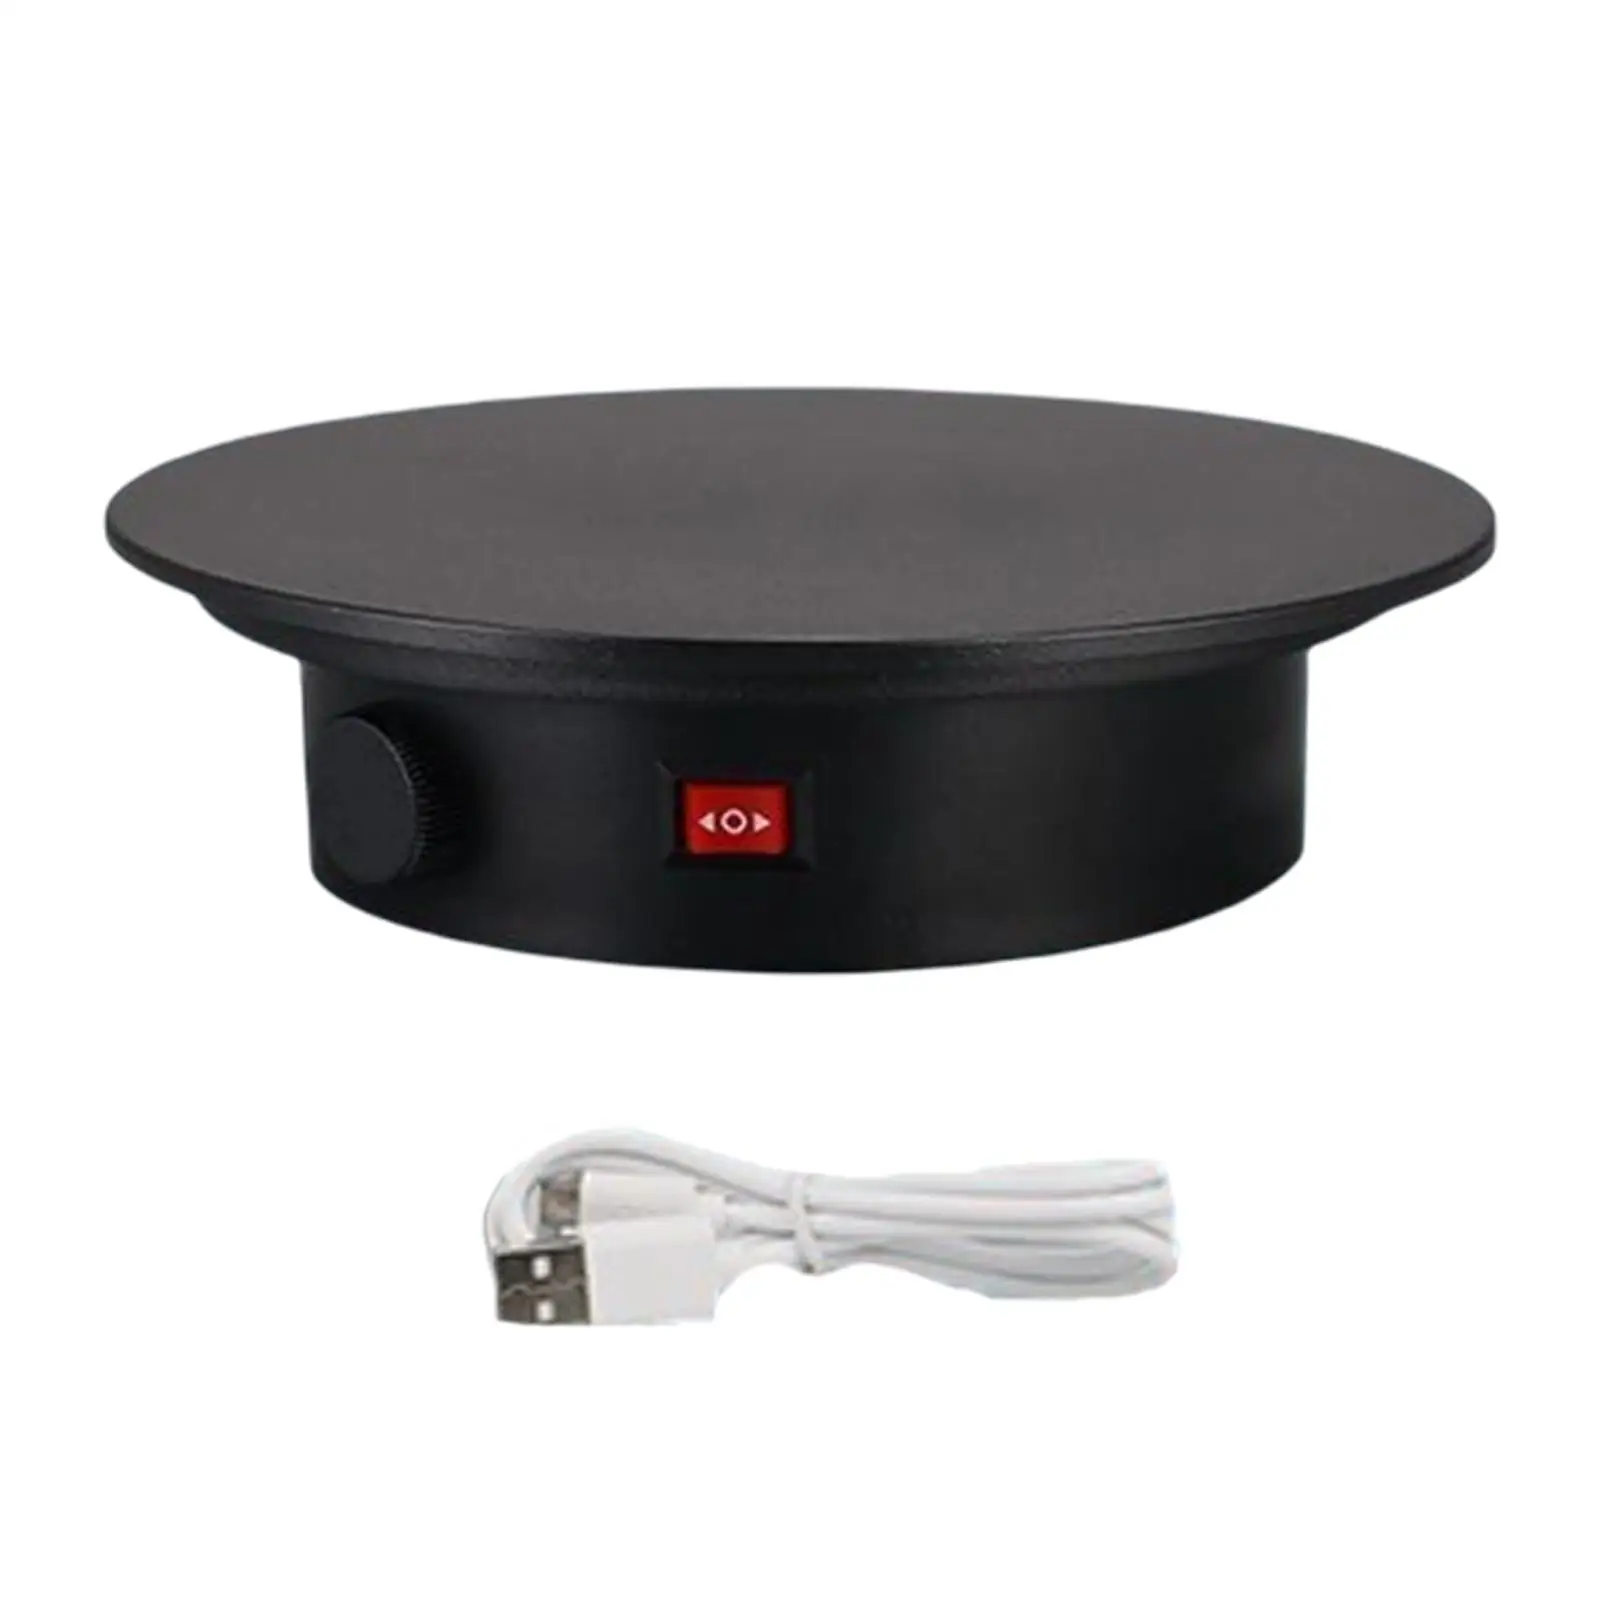 360 Degree Rotating Display Stand 200mm Display Table 15kg Load for Cake